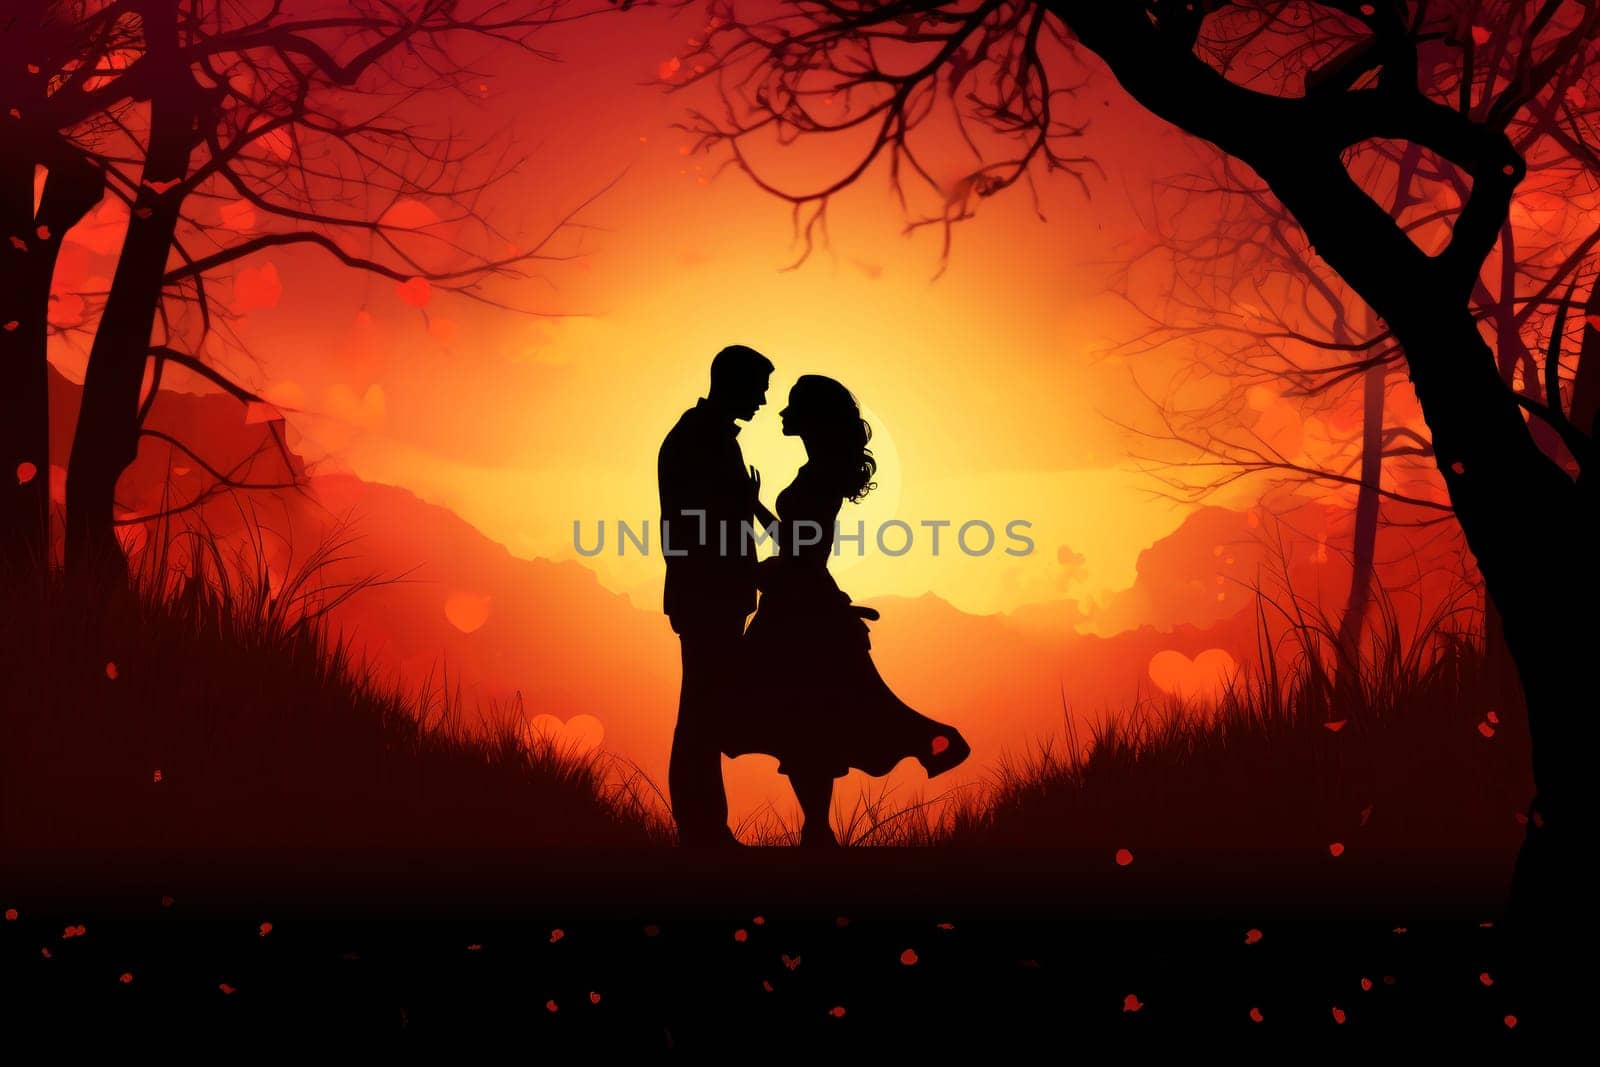 Silhouette of a loving couple of a man and a woman against a sunset background, the concept of love and relationships. Valentine's day background.